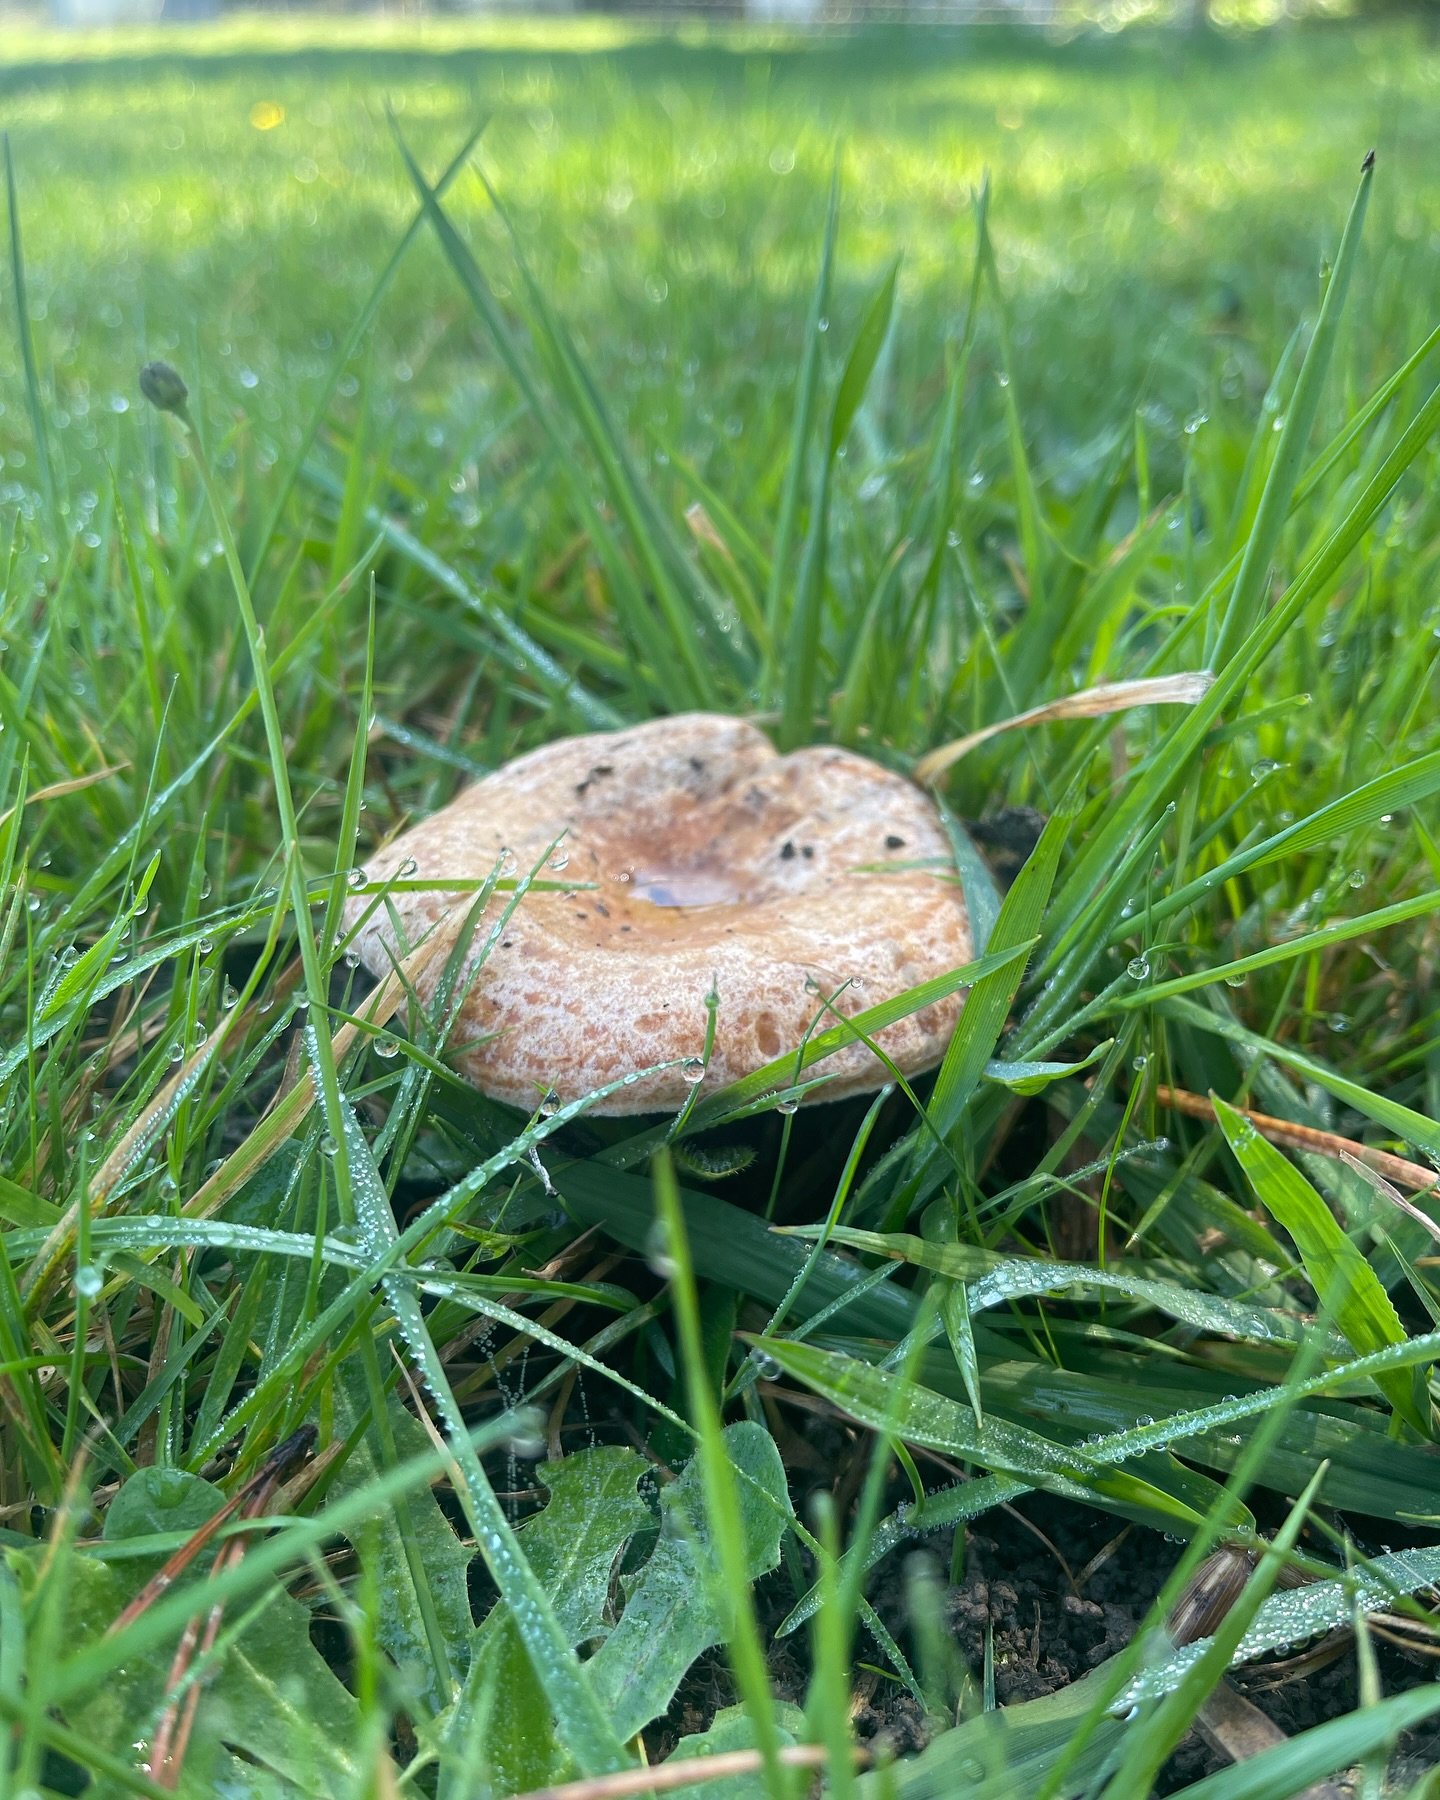 Mushroom Foraging &amp; Lunch at Mabellae Farm
$150.00 Book via the website or the link in stories

Saturday 20th April 2024

11am - 2pm

Mabellae Farm, Moss Vale NSW

Join Emily and Emma Jane for a day of foraging for mushrooms followed by a delicio